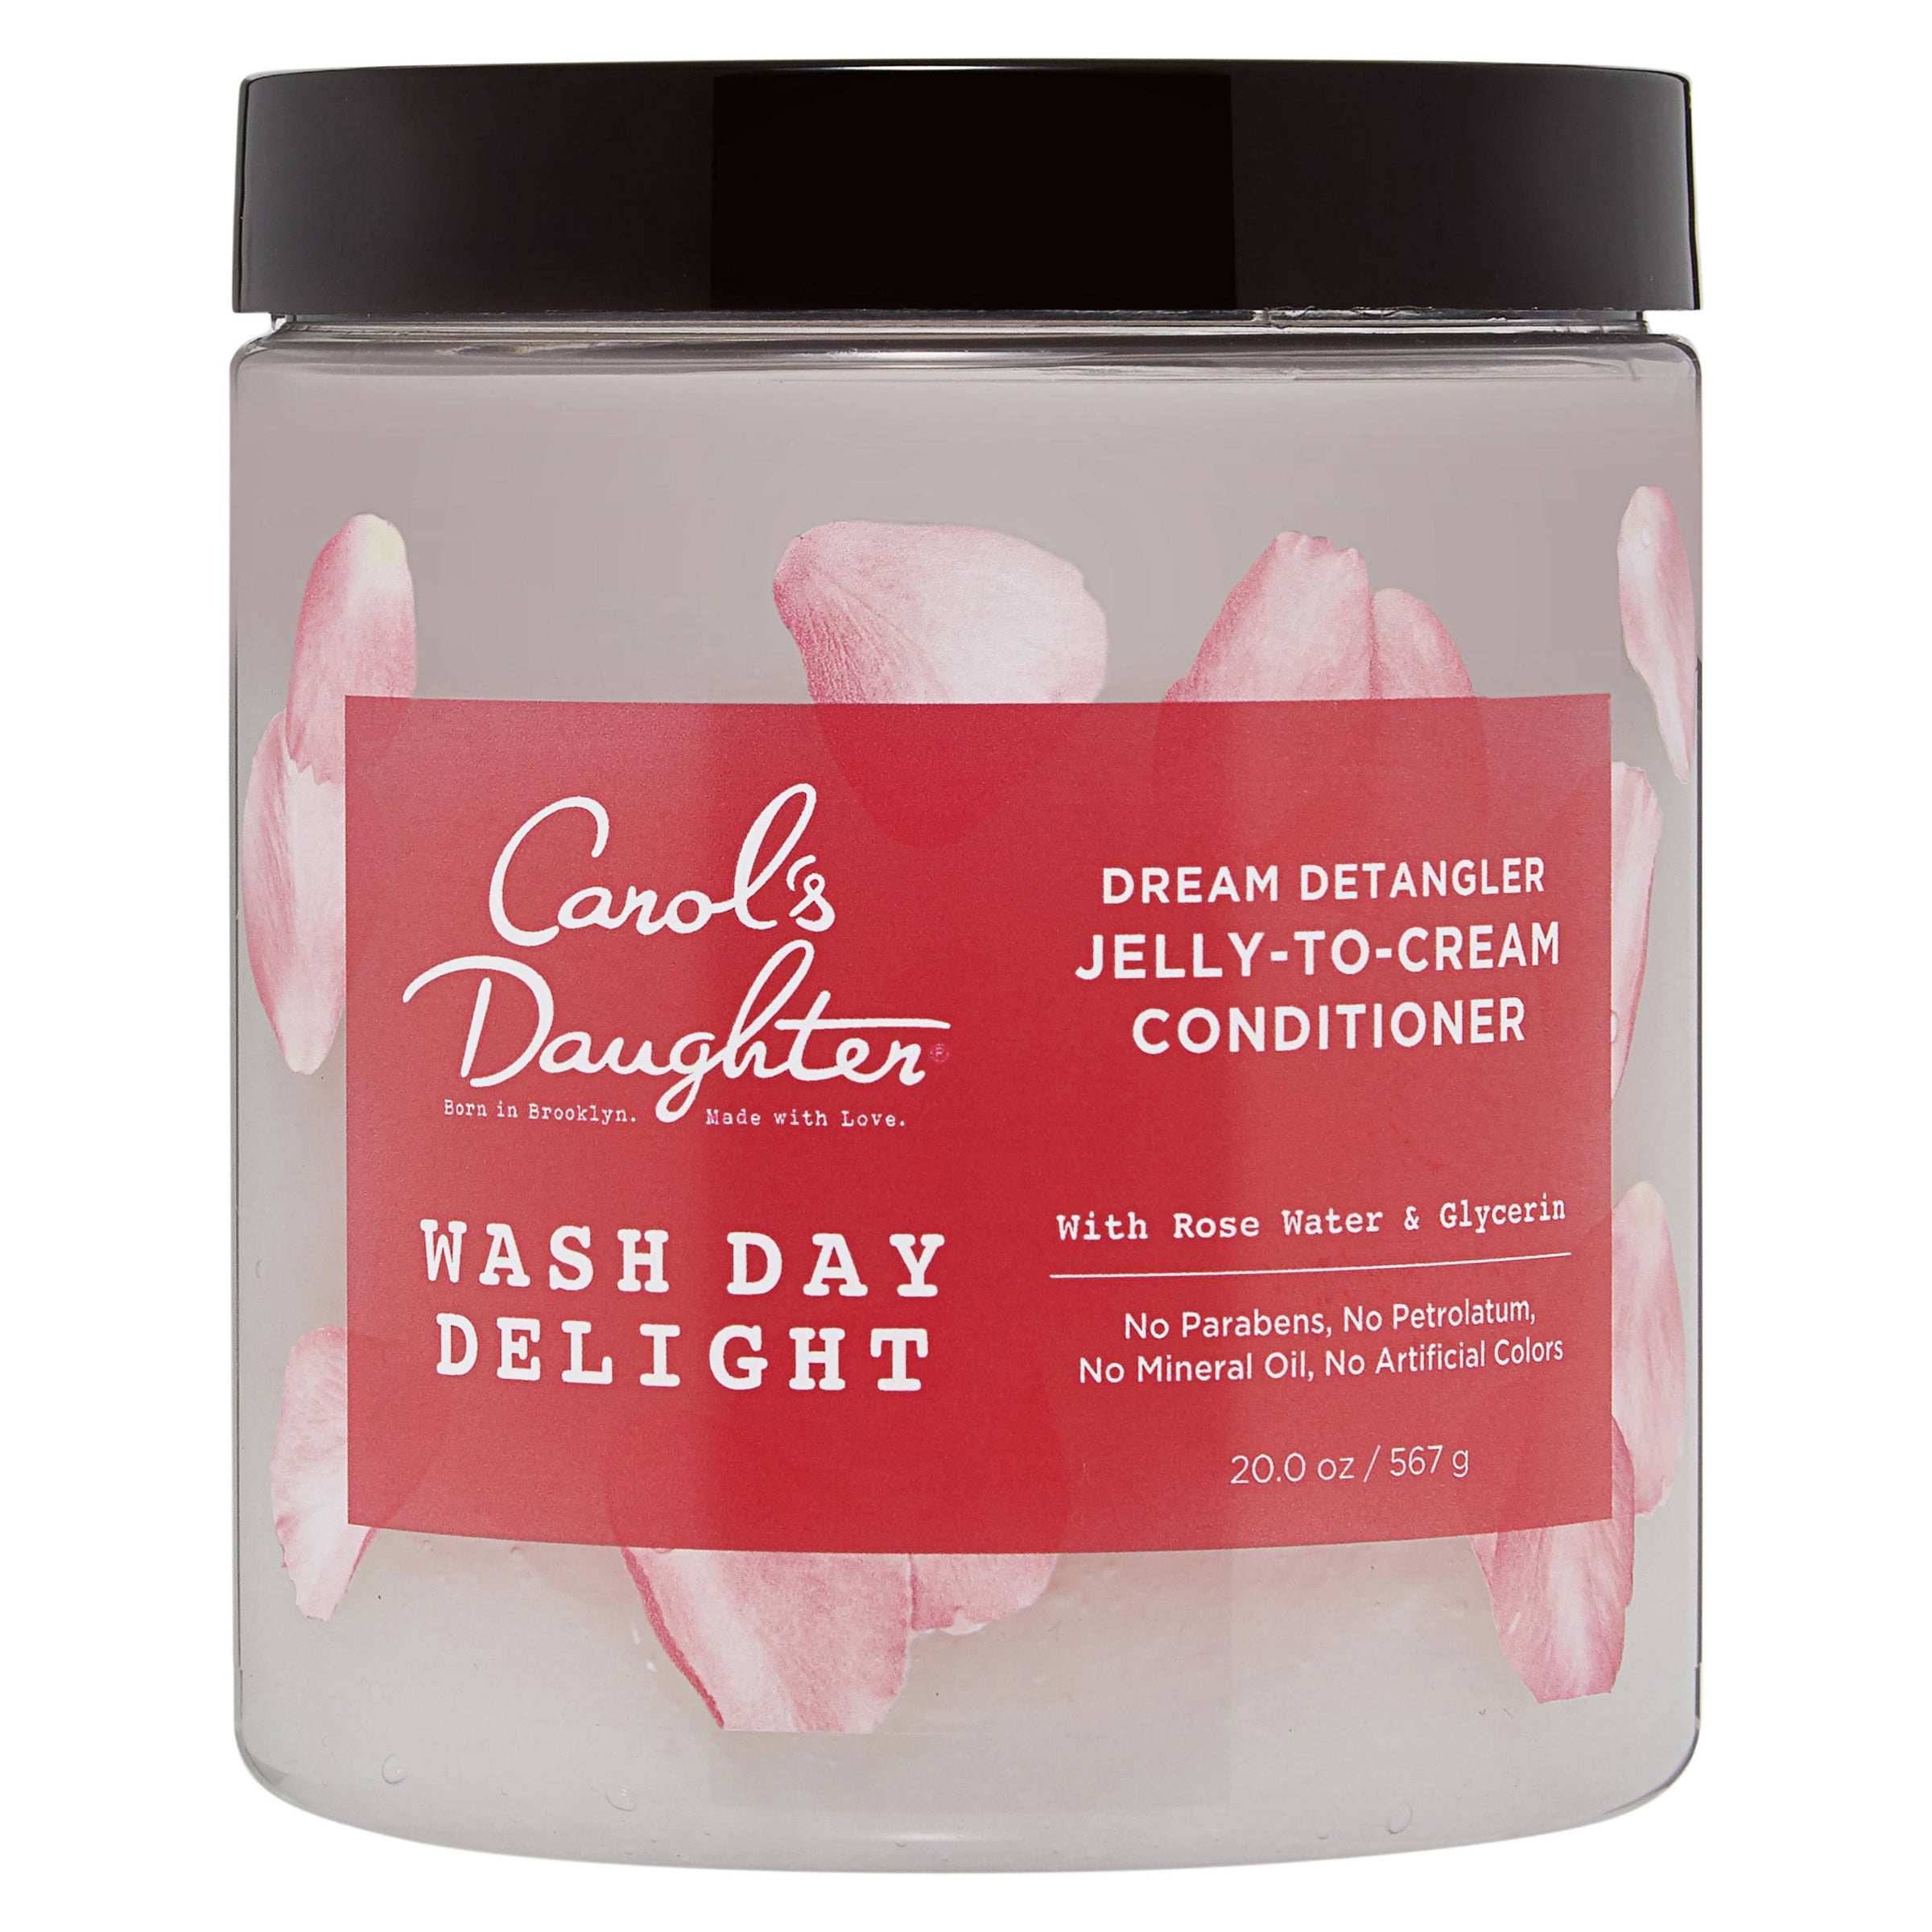 Carol's Daughter Wash Day Delight Detangling Jelly-to-Cream nourishing Daily Conditioner with Glycerin and Rose Water, 20 oz